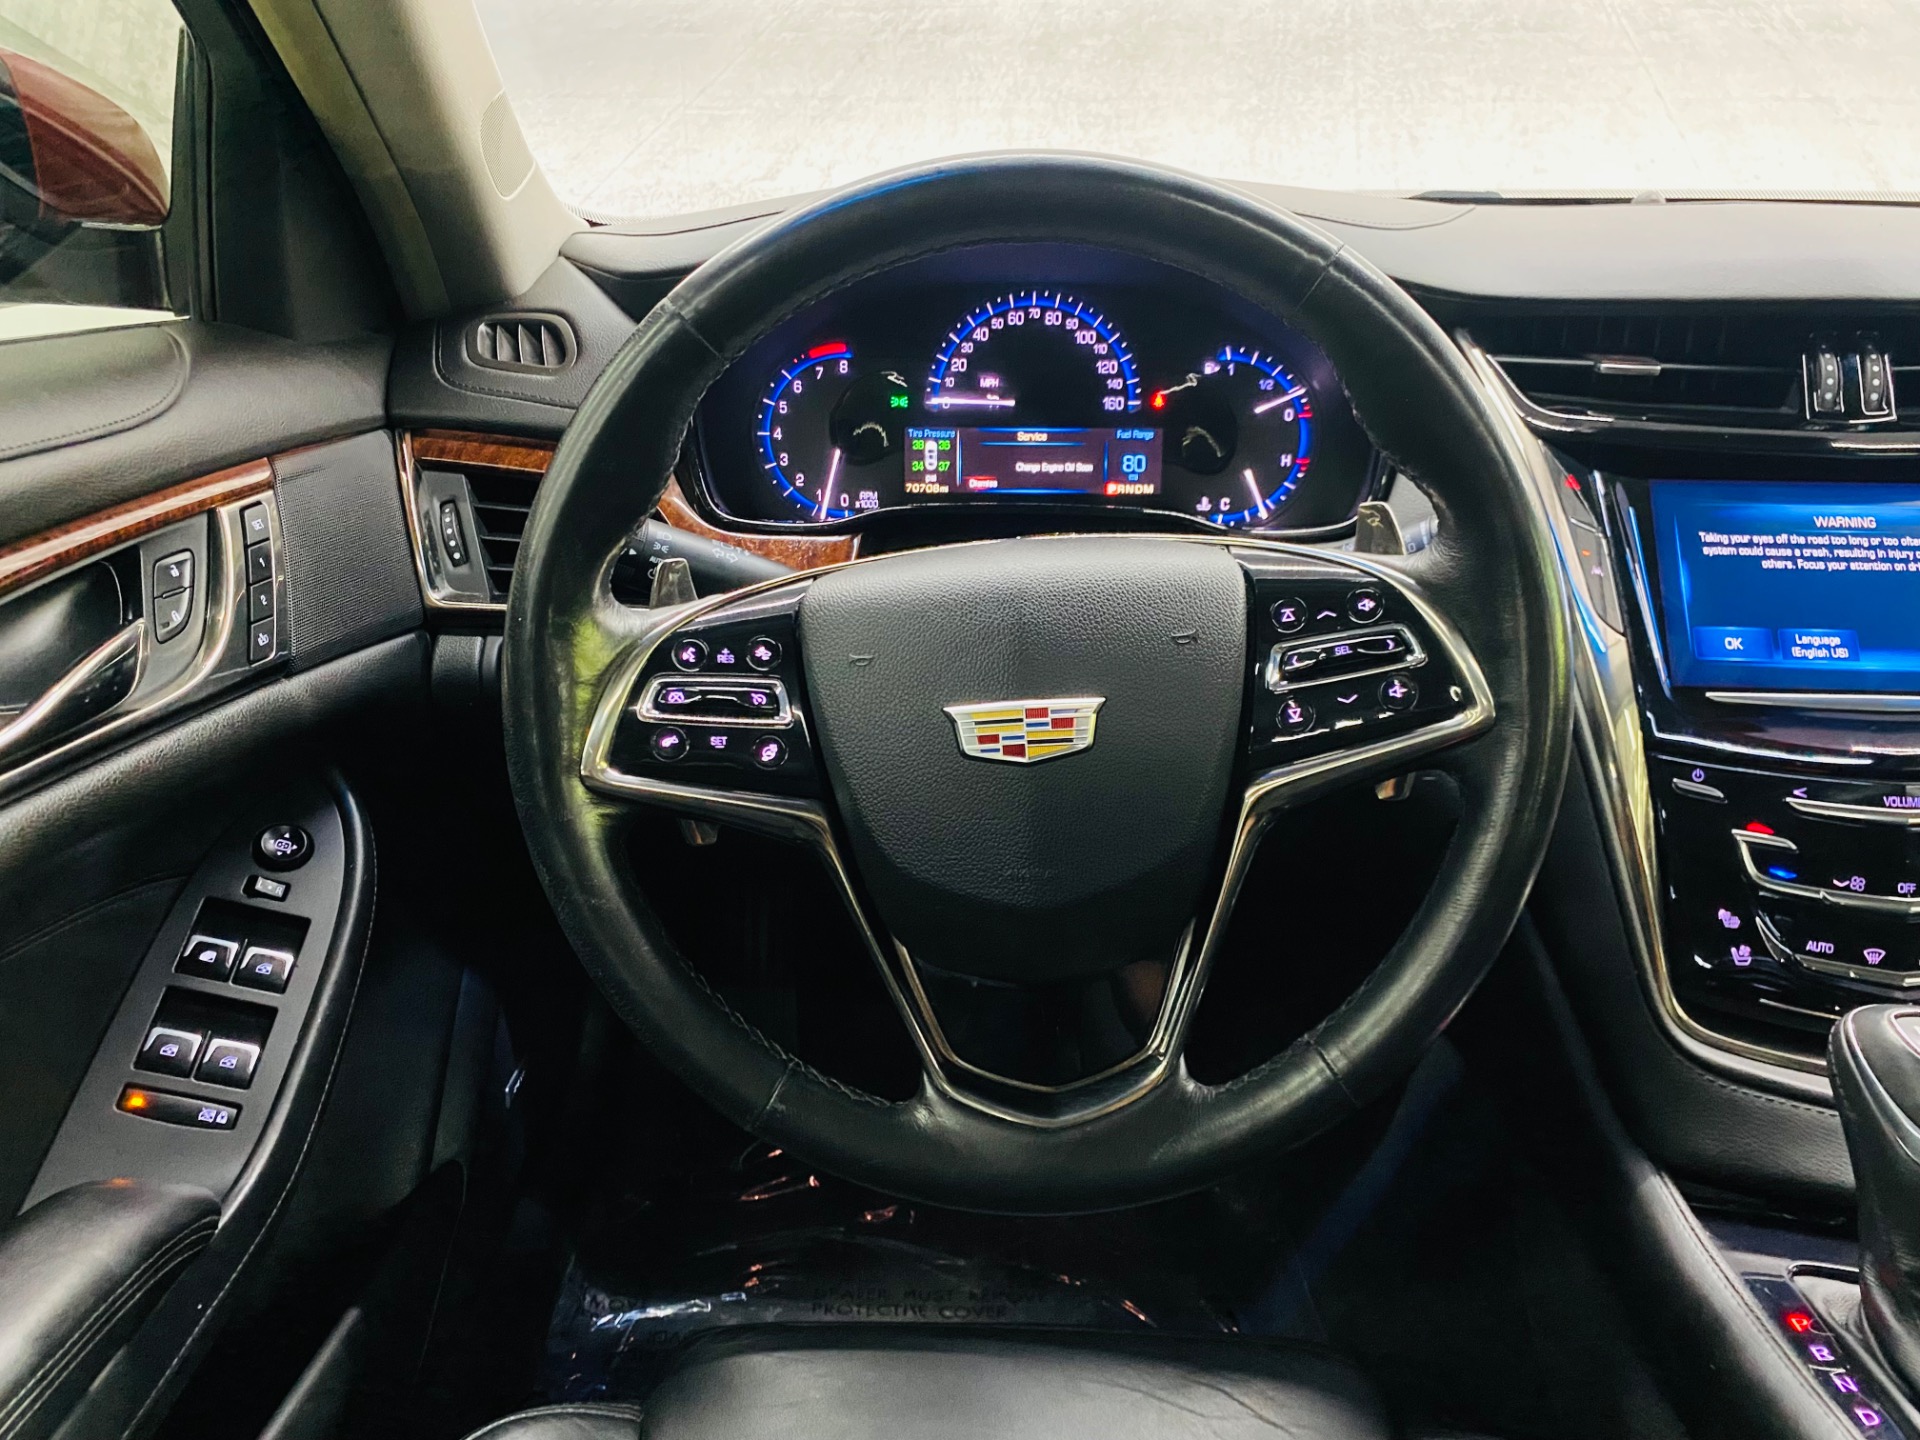 2019 Cadillac CTS 20L Turbo Price Review Photos Canada  Driving